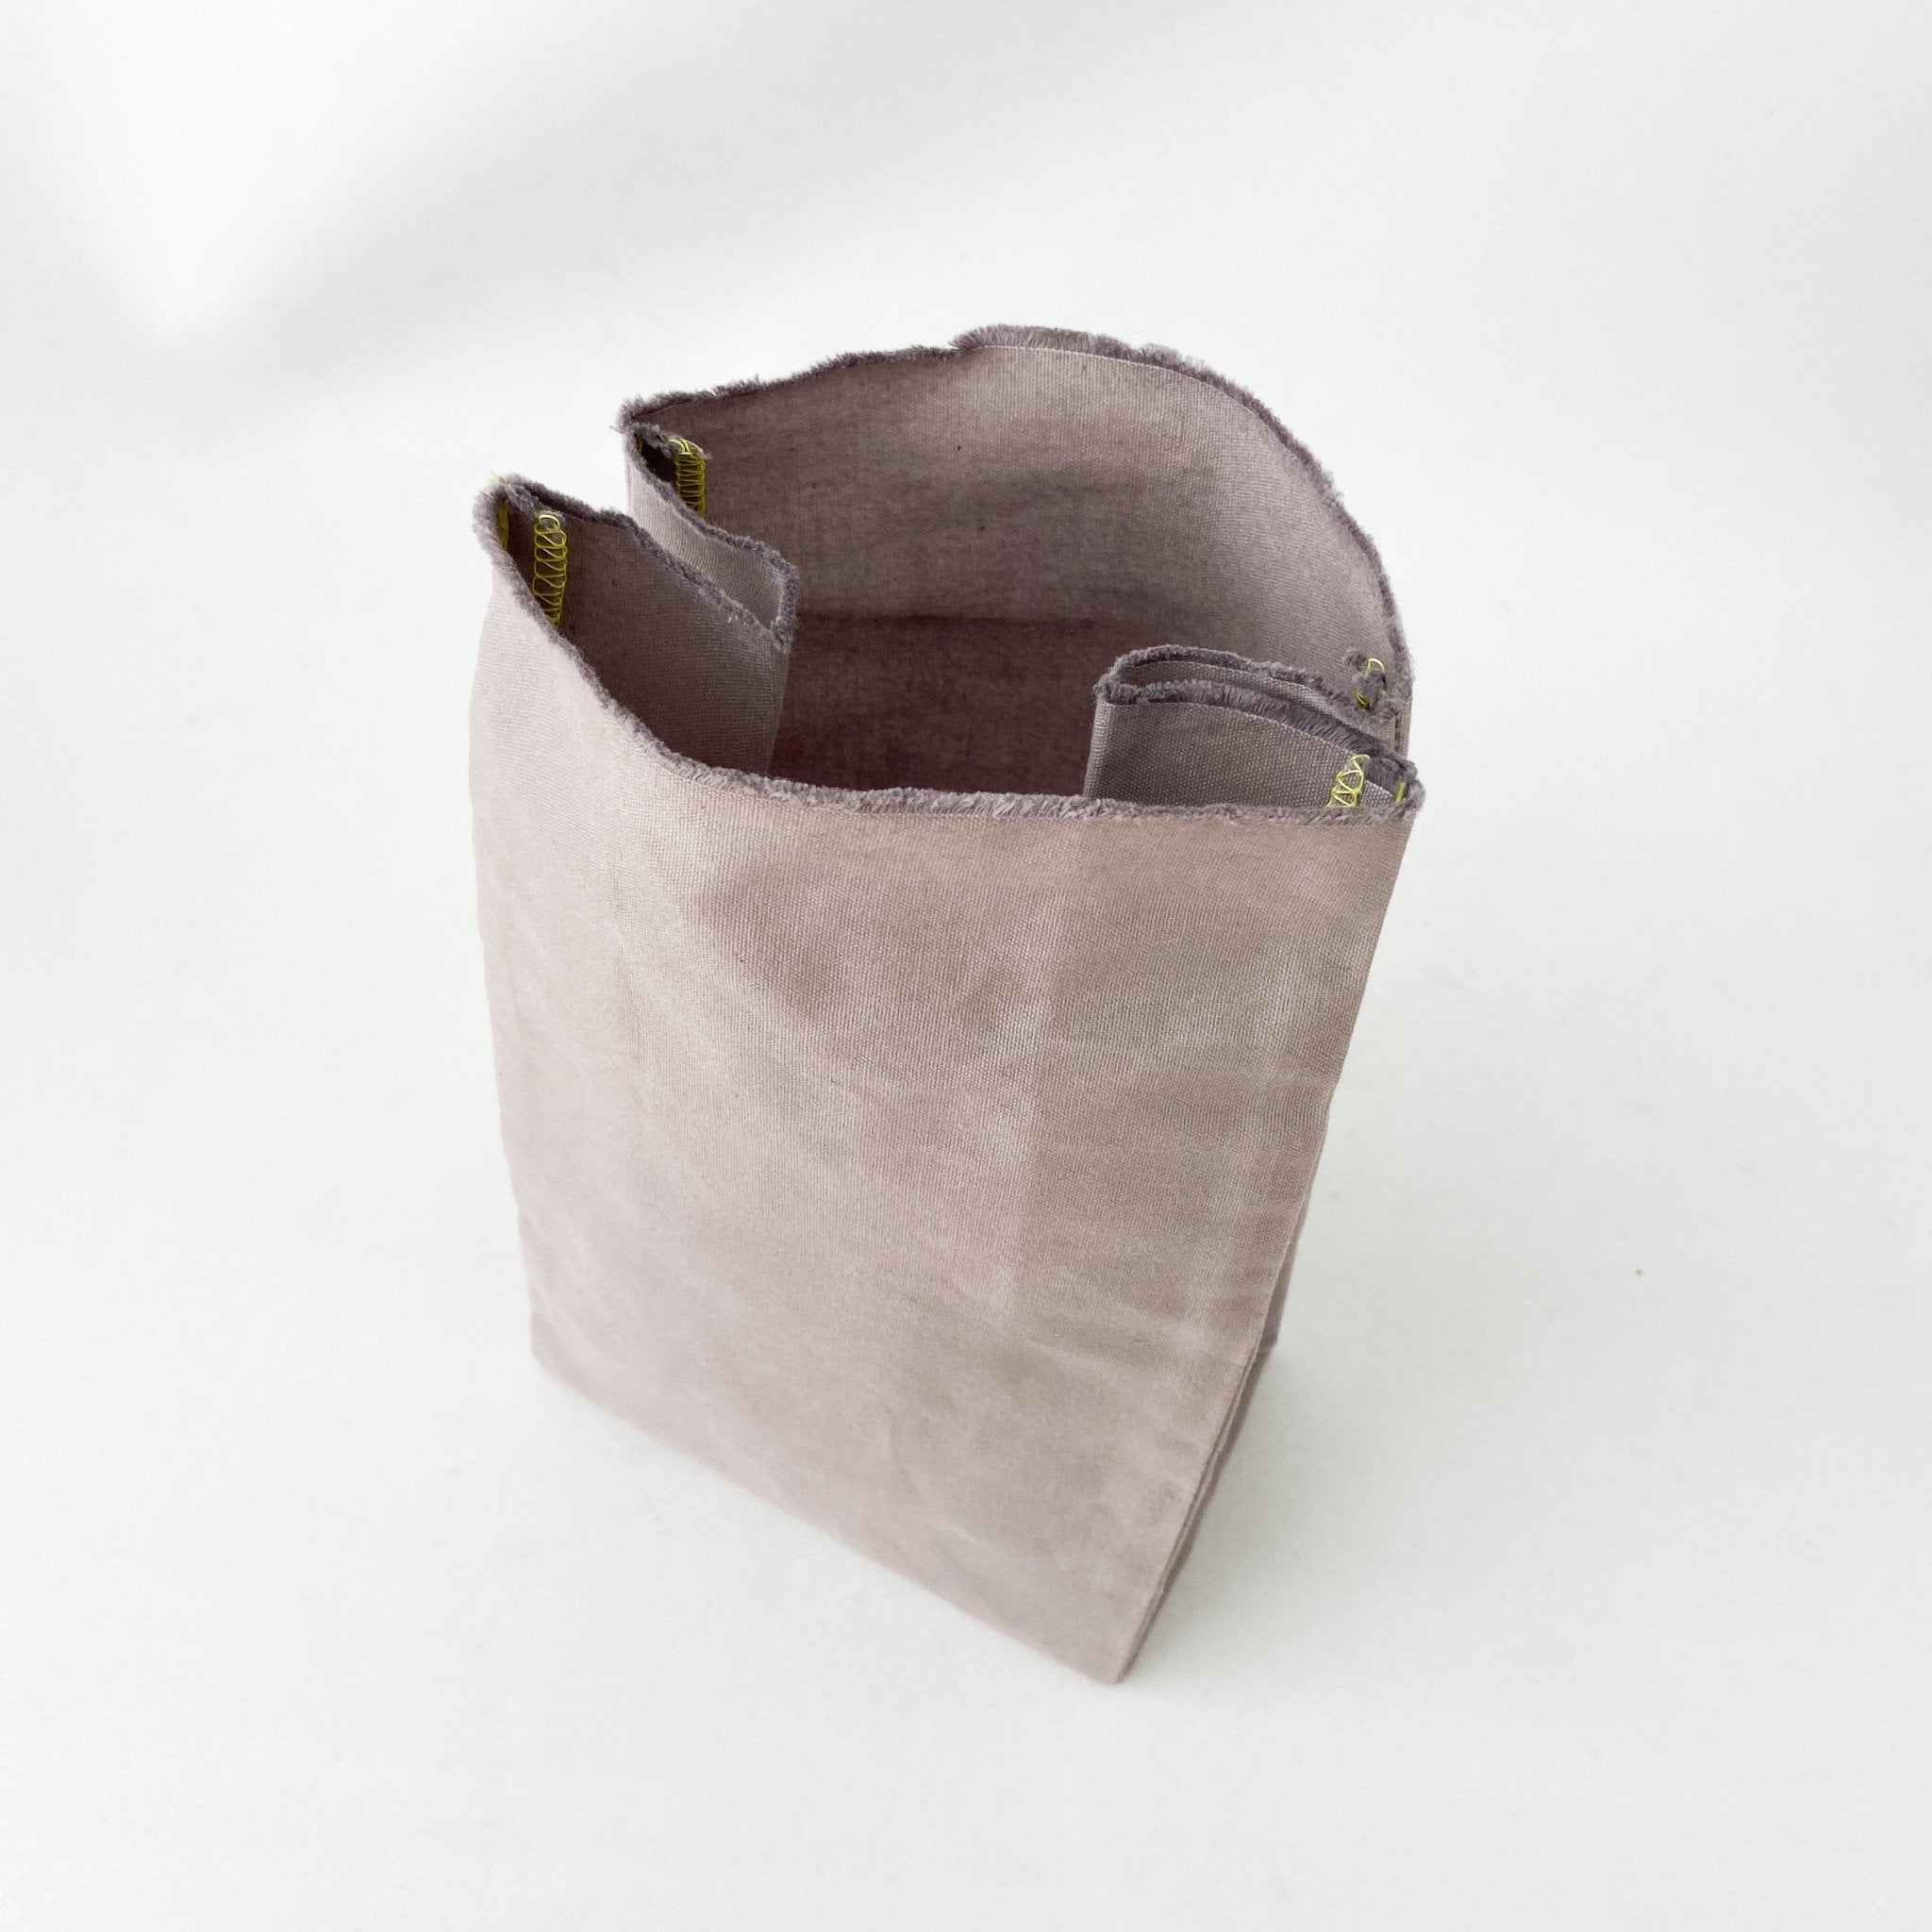 WOL Canvas Lunch Bag - tortoise general store